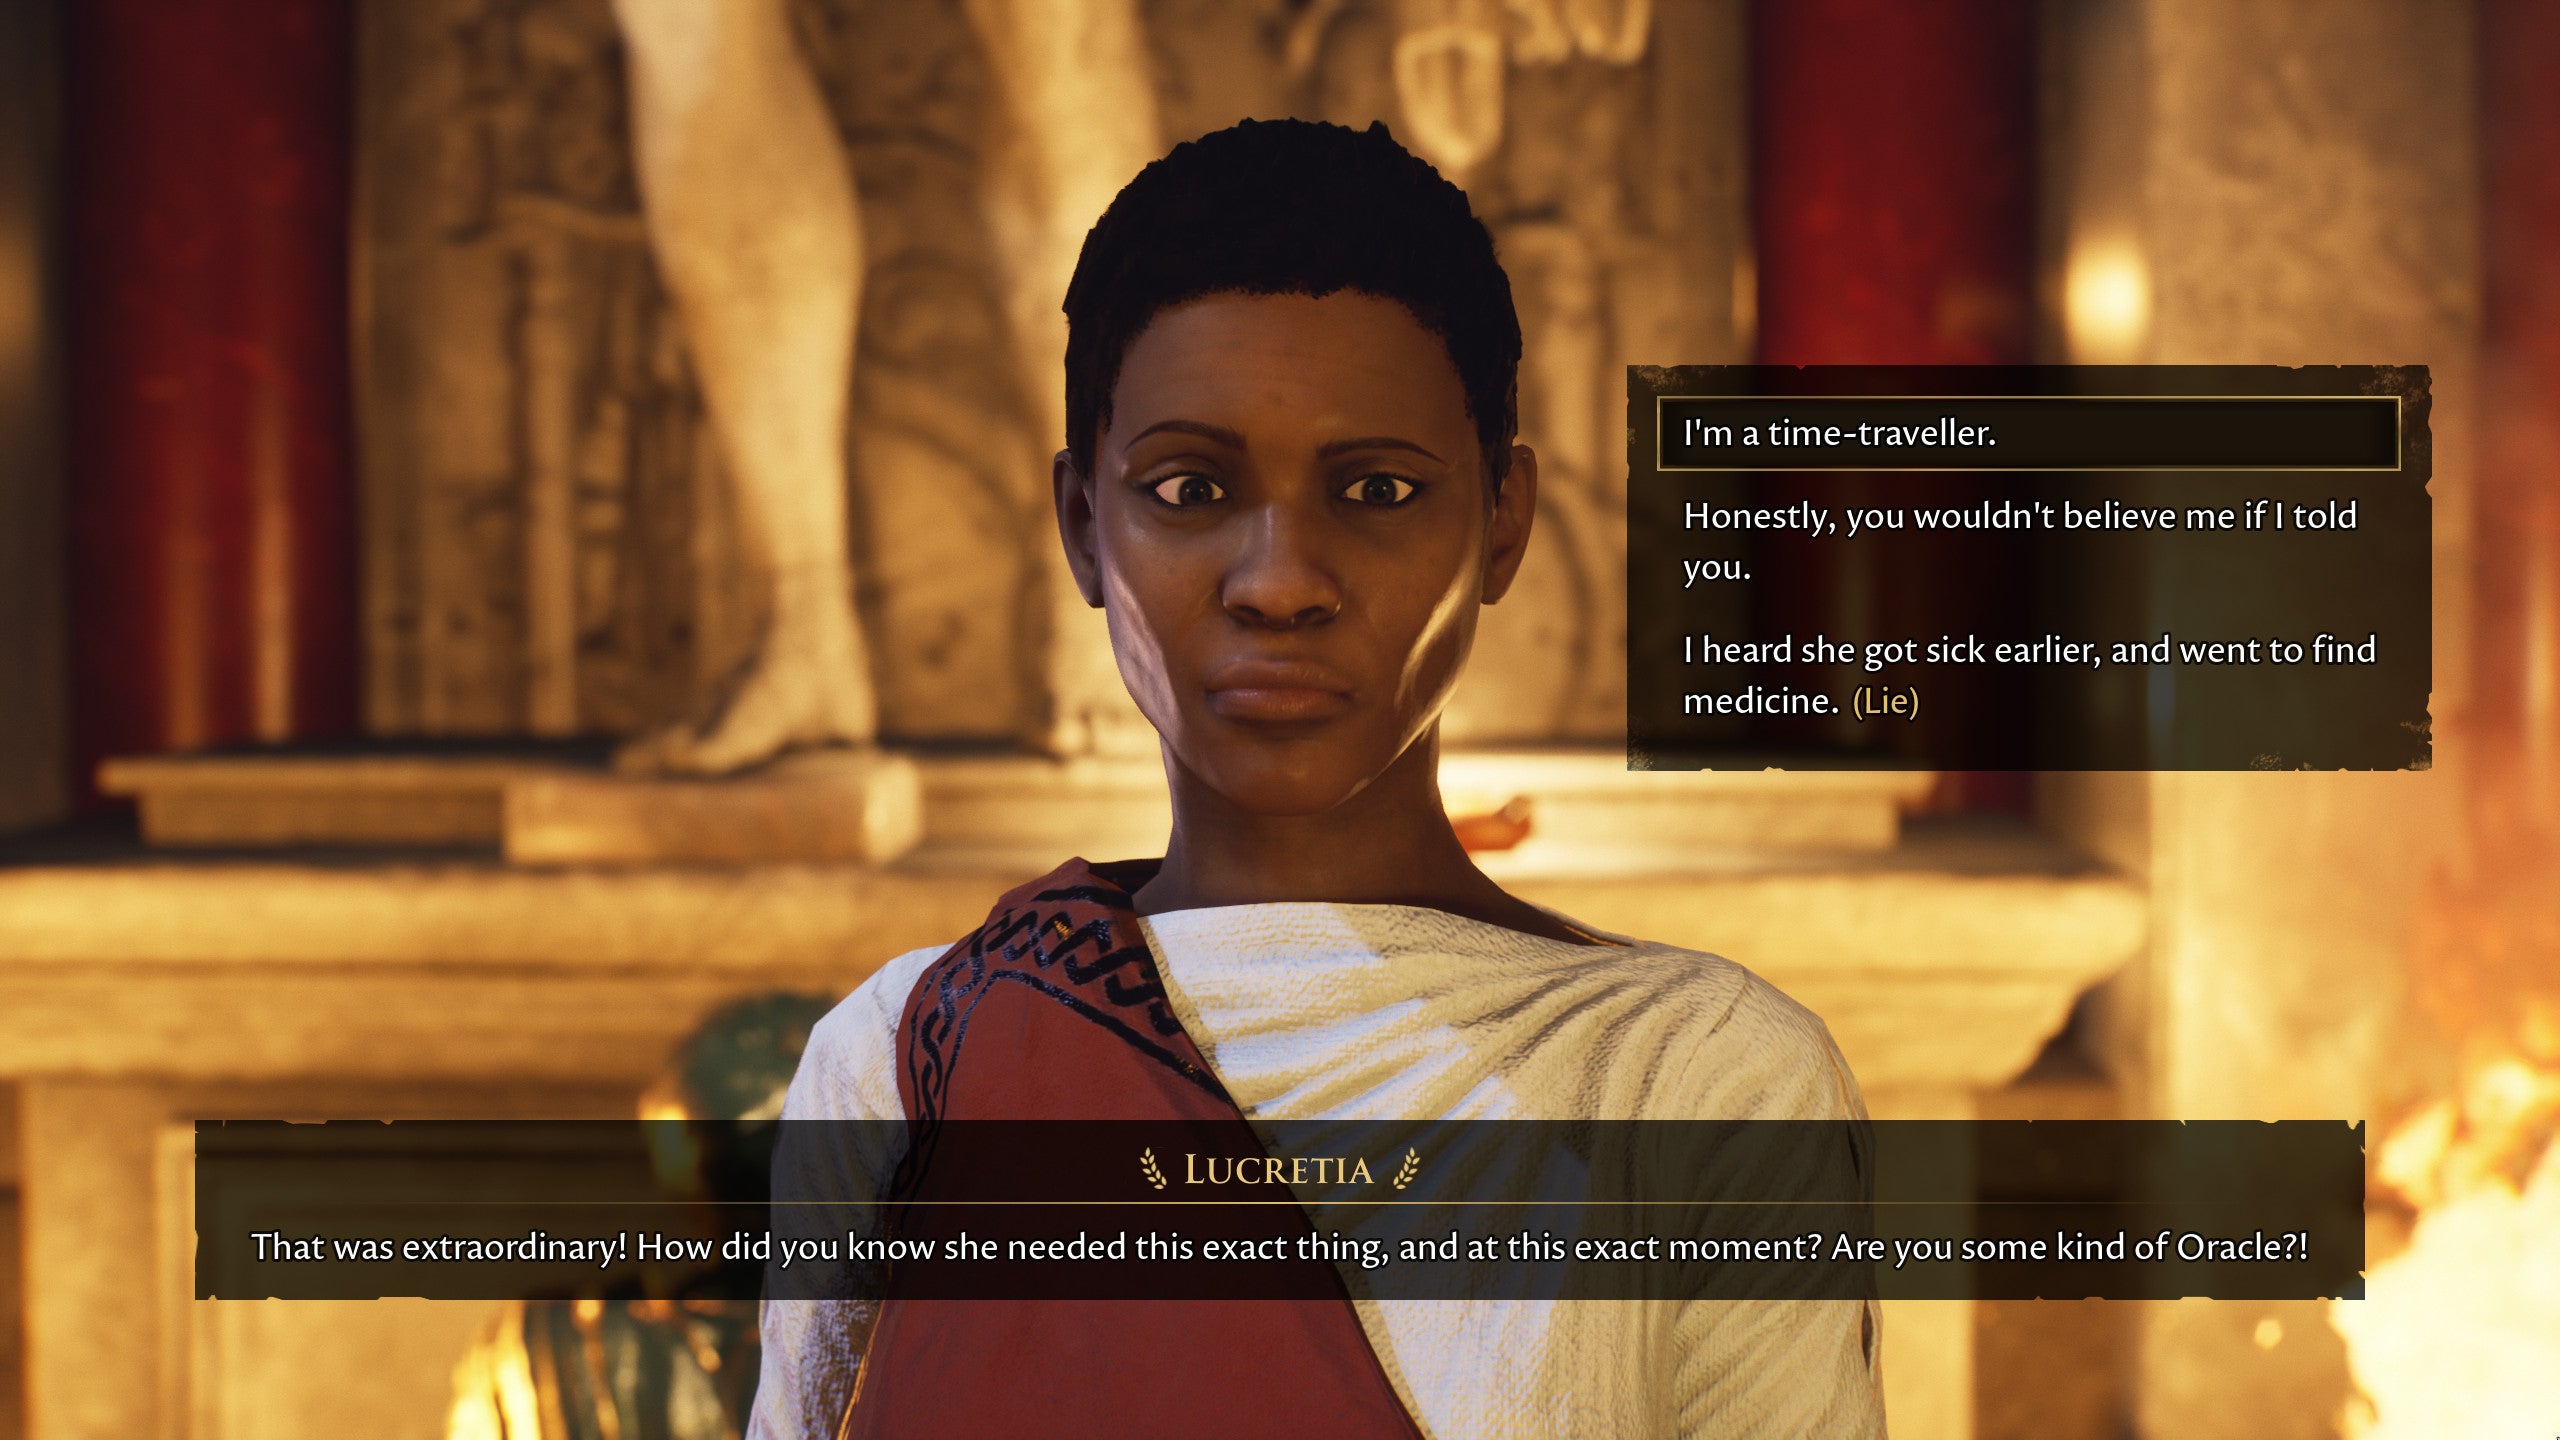 Chatting with Lucretia in a The Forgotten City screenshot.